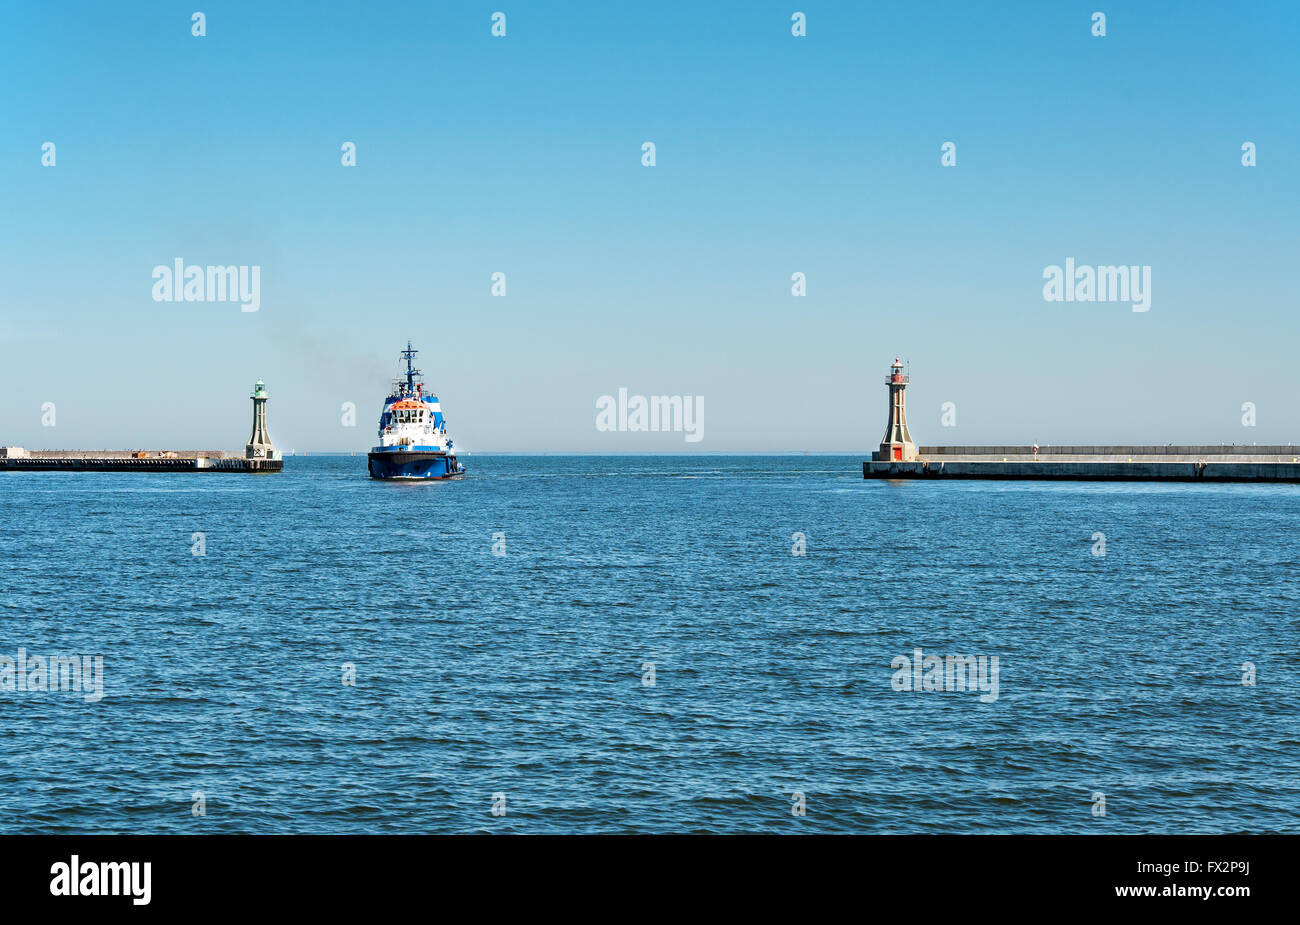 A tugboat entering the harbor in Gdynia, Poland Stock Photo